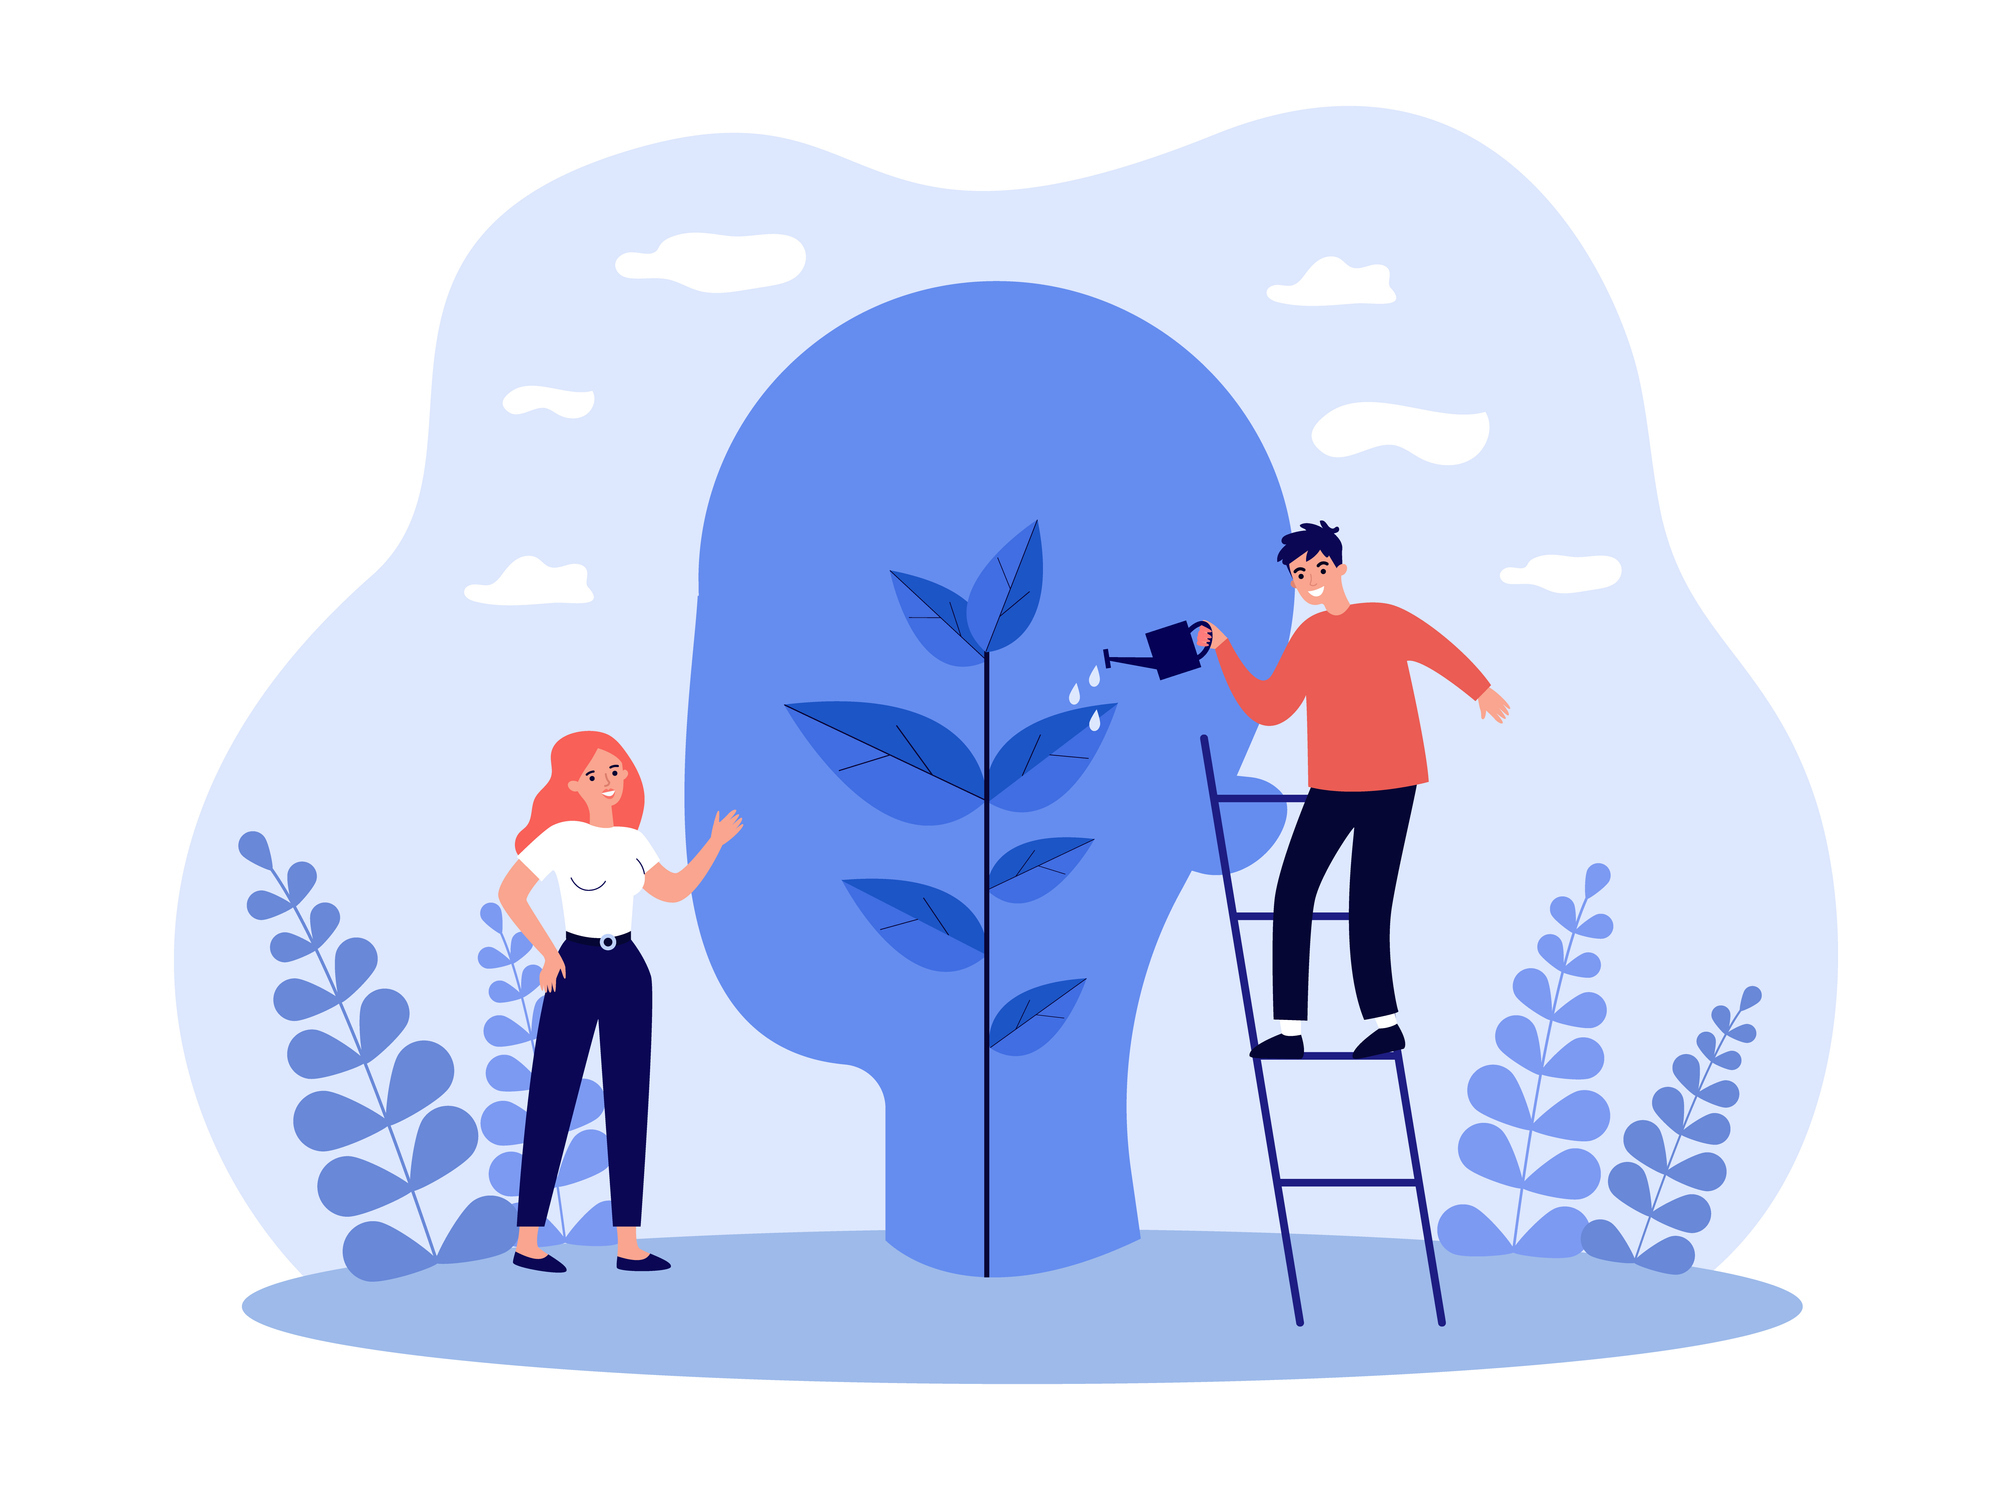 Illustration of two people watering the tree of someone&#x27;s mind, representative of healing with support